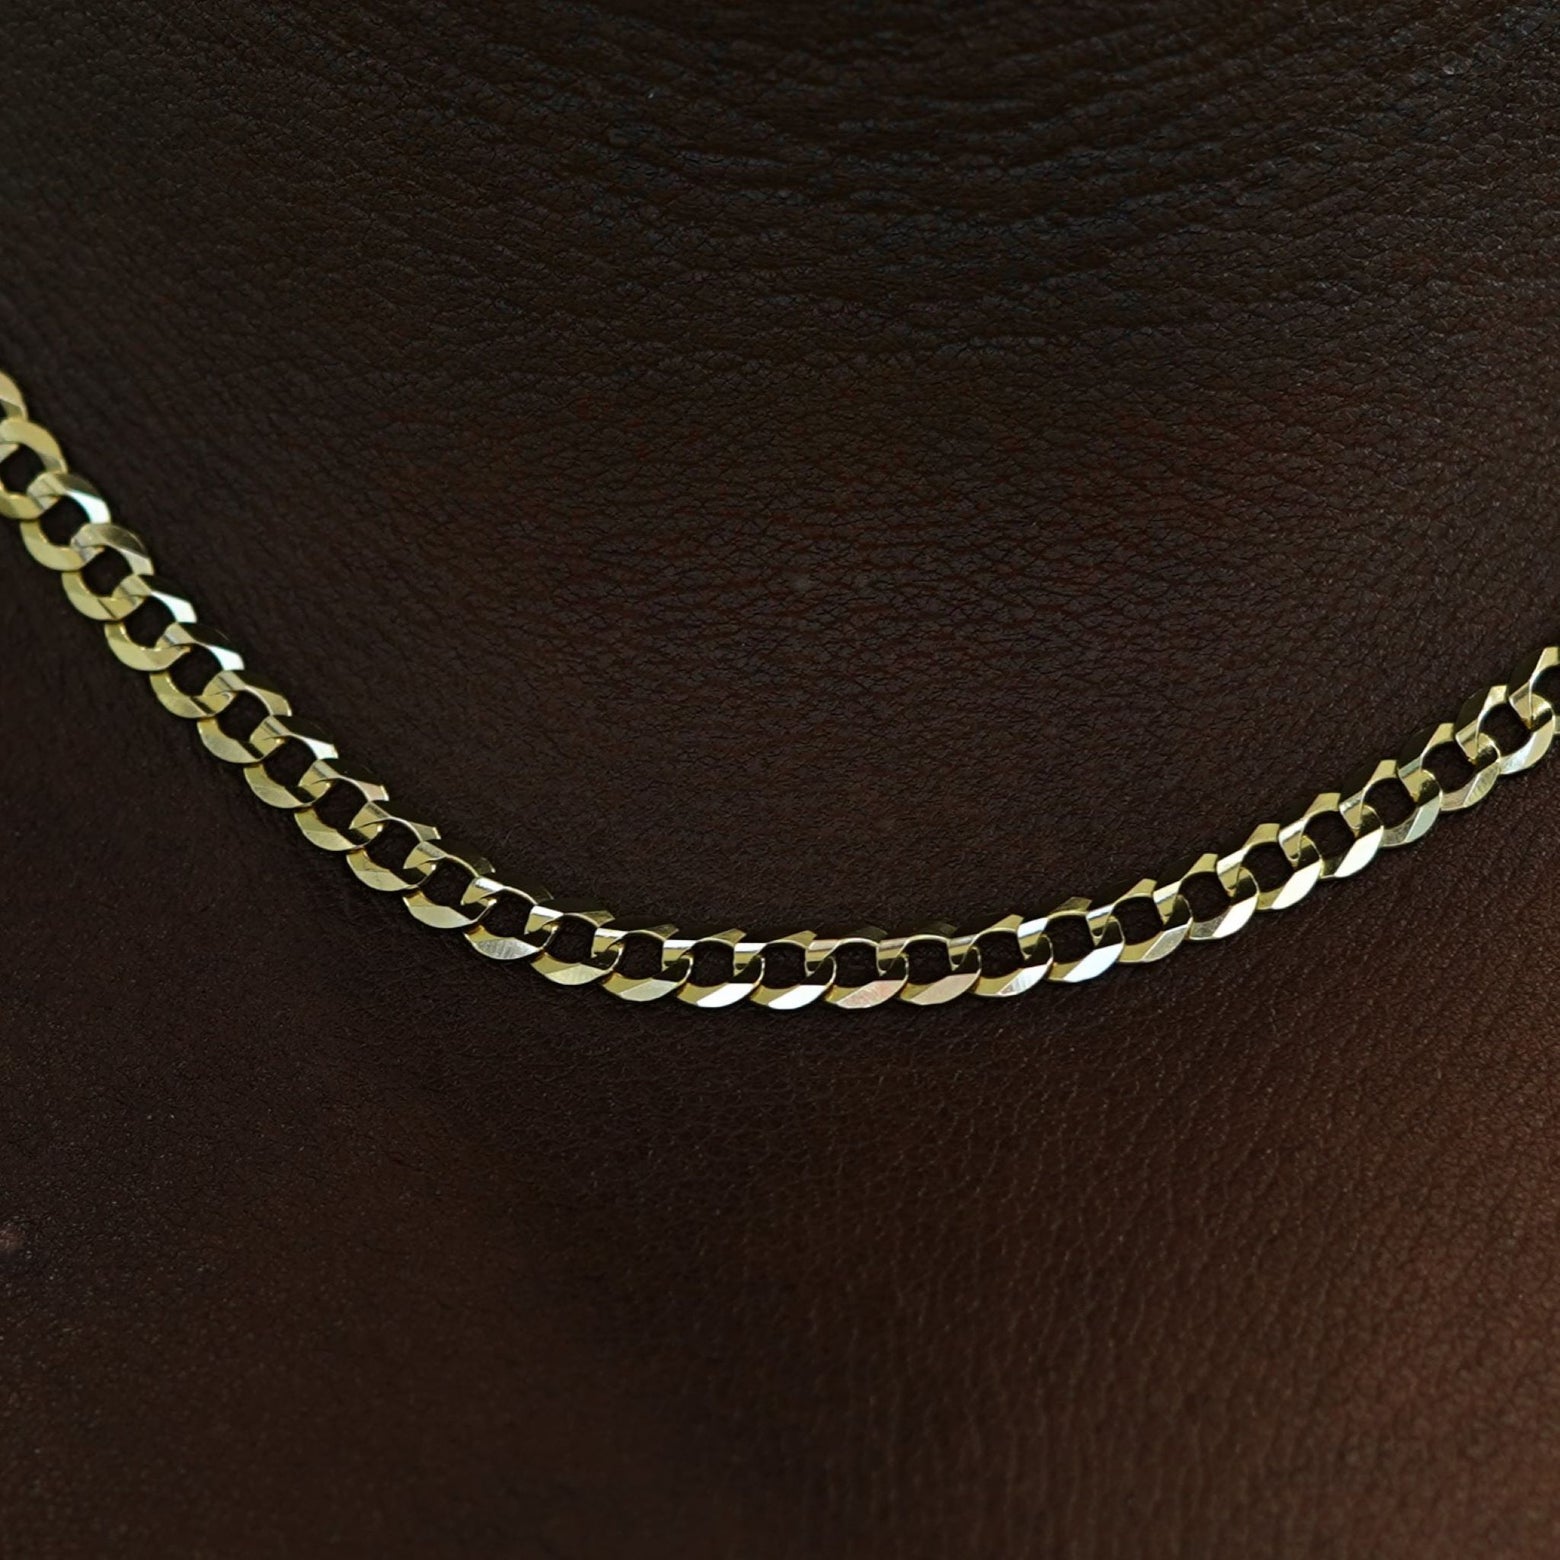 Close up view of a model's neck wearing a solid 14k gold Curb Chain